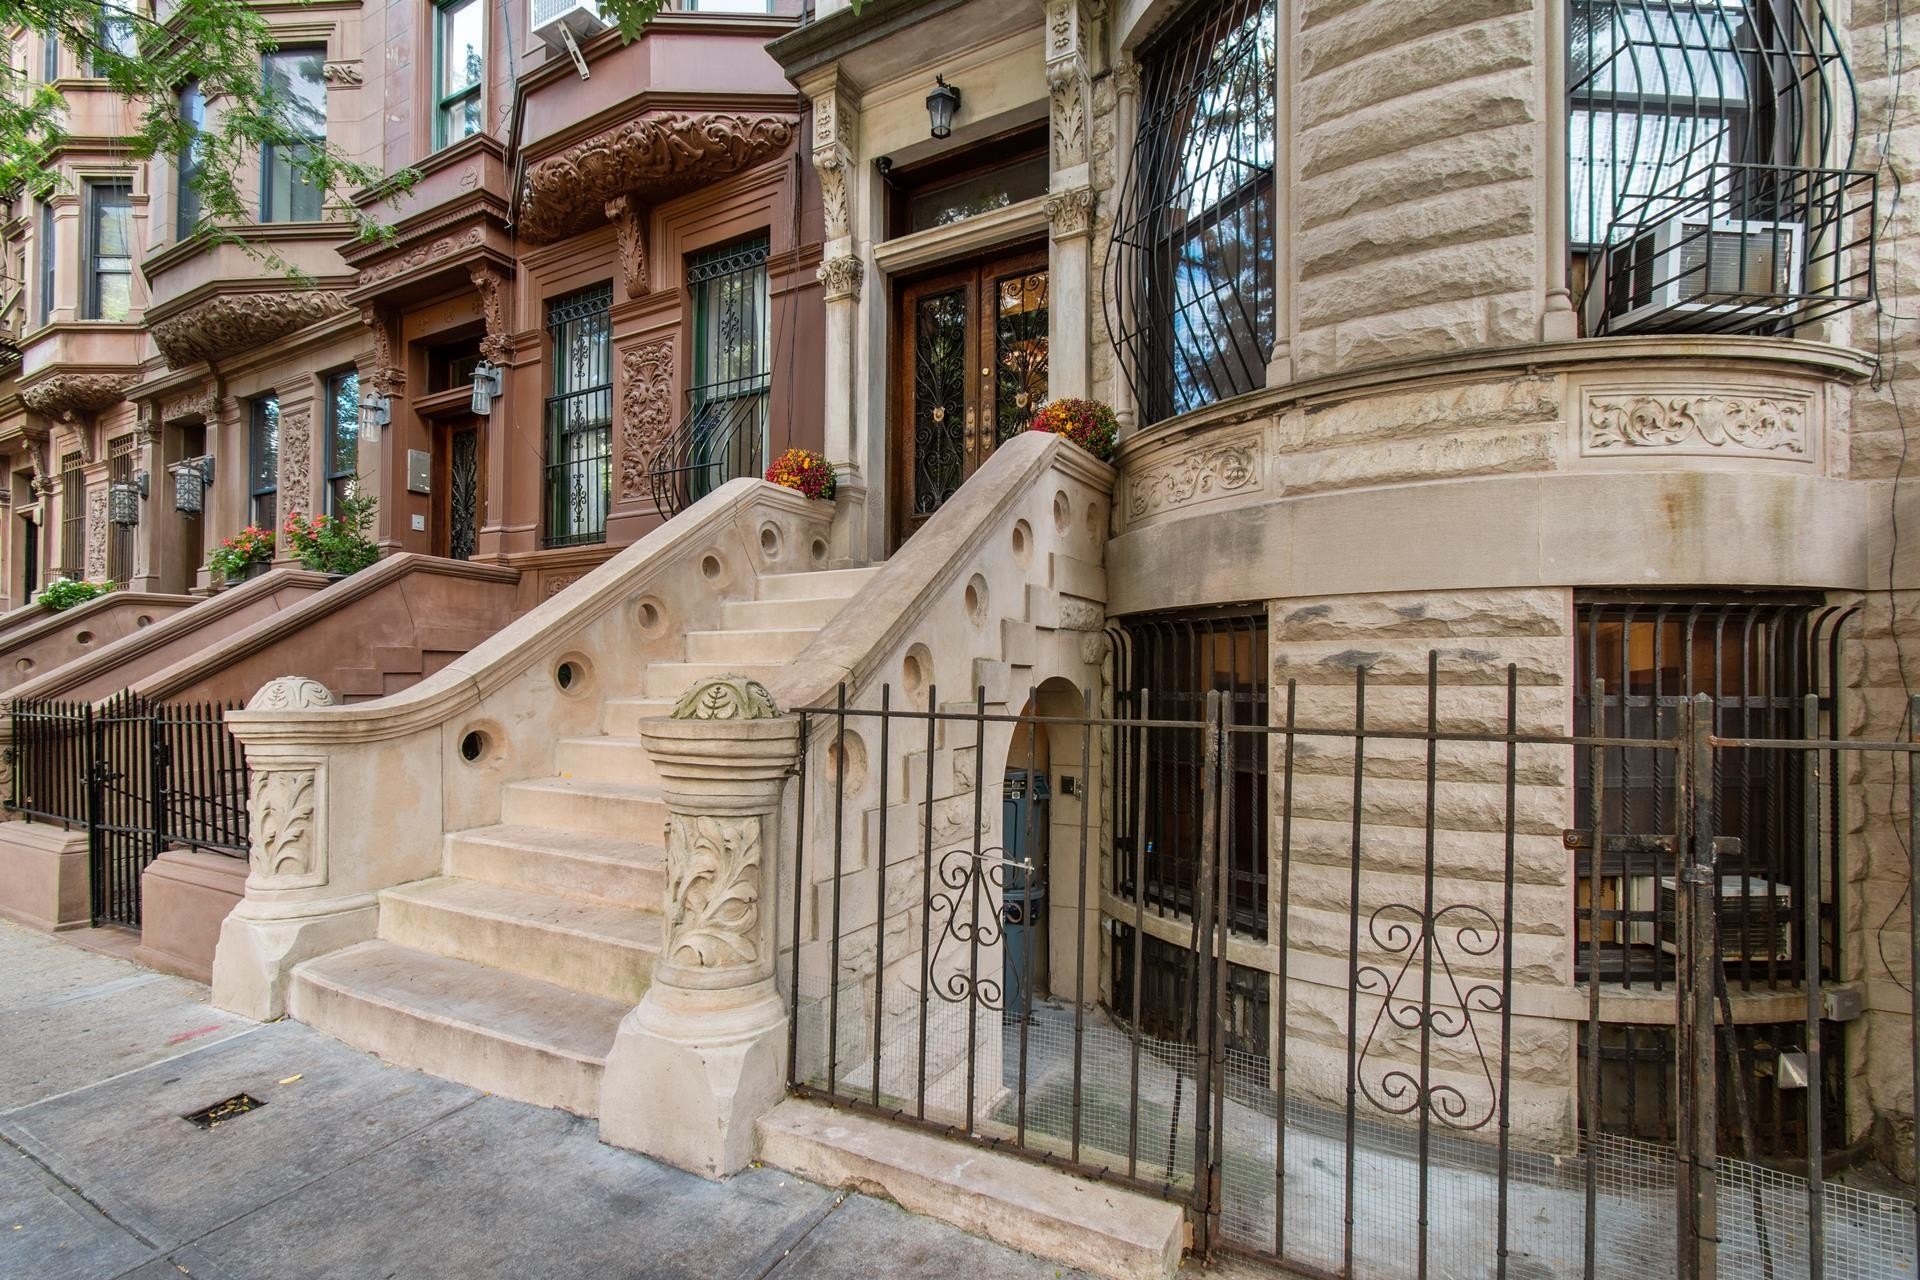 Property at 144 W 119TH ST, TOWNHOUSE South Harlem, New York, New York 10026